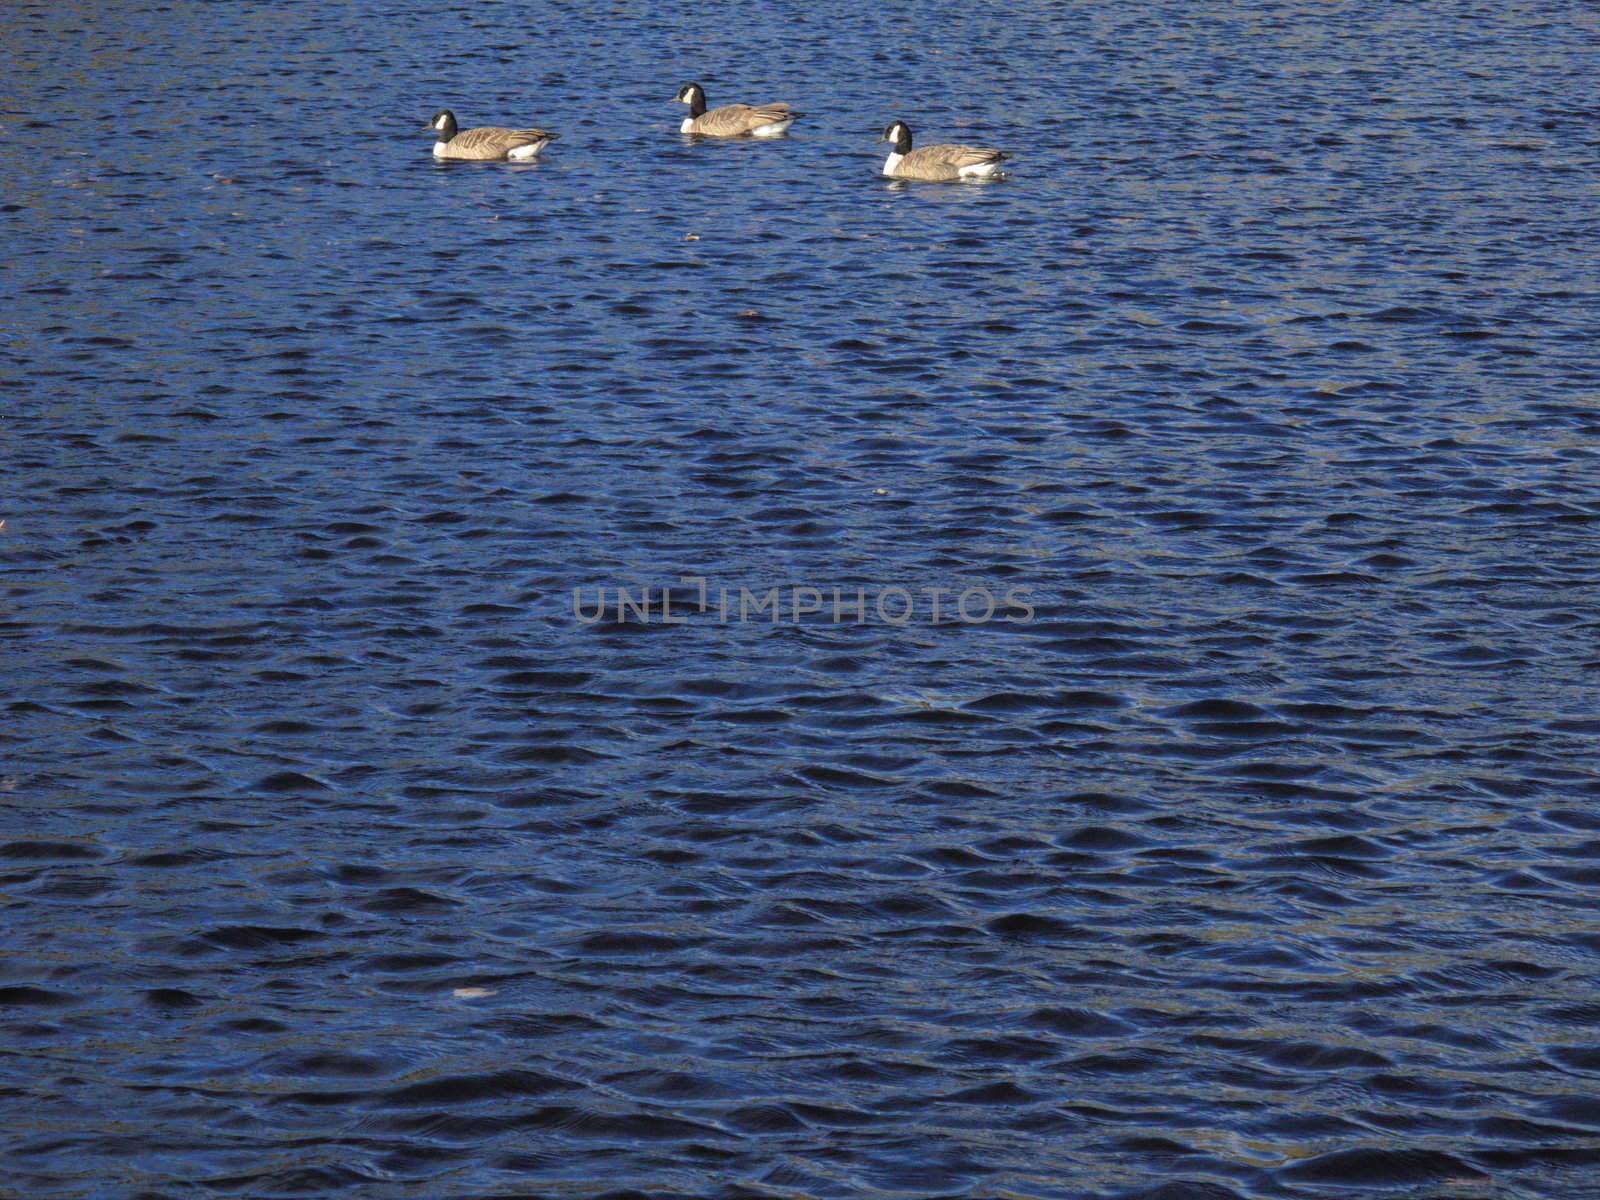 Canadian Geese line up for a swim